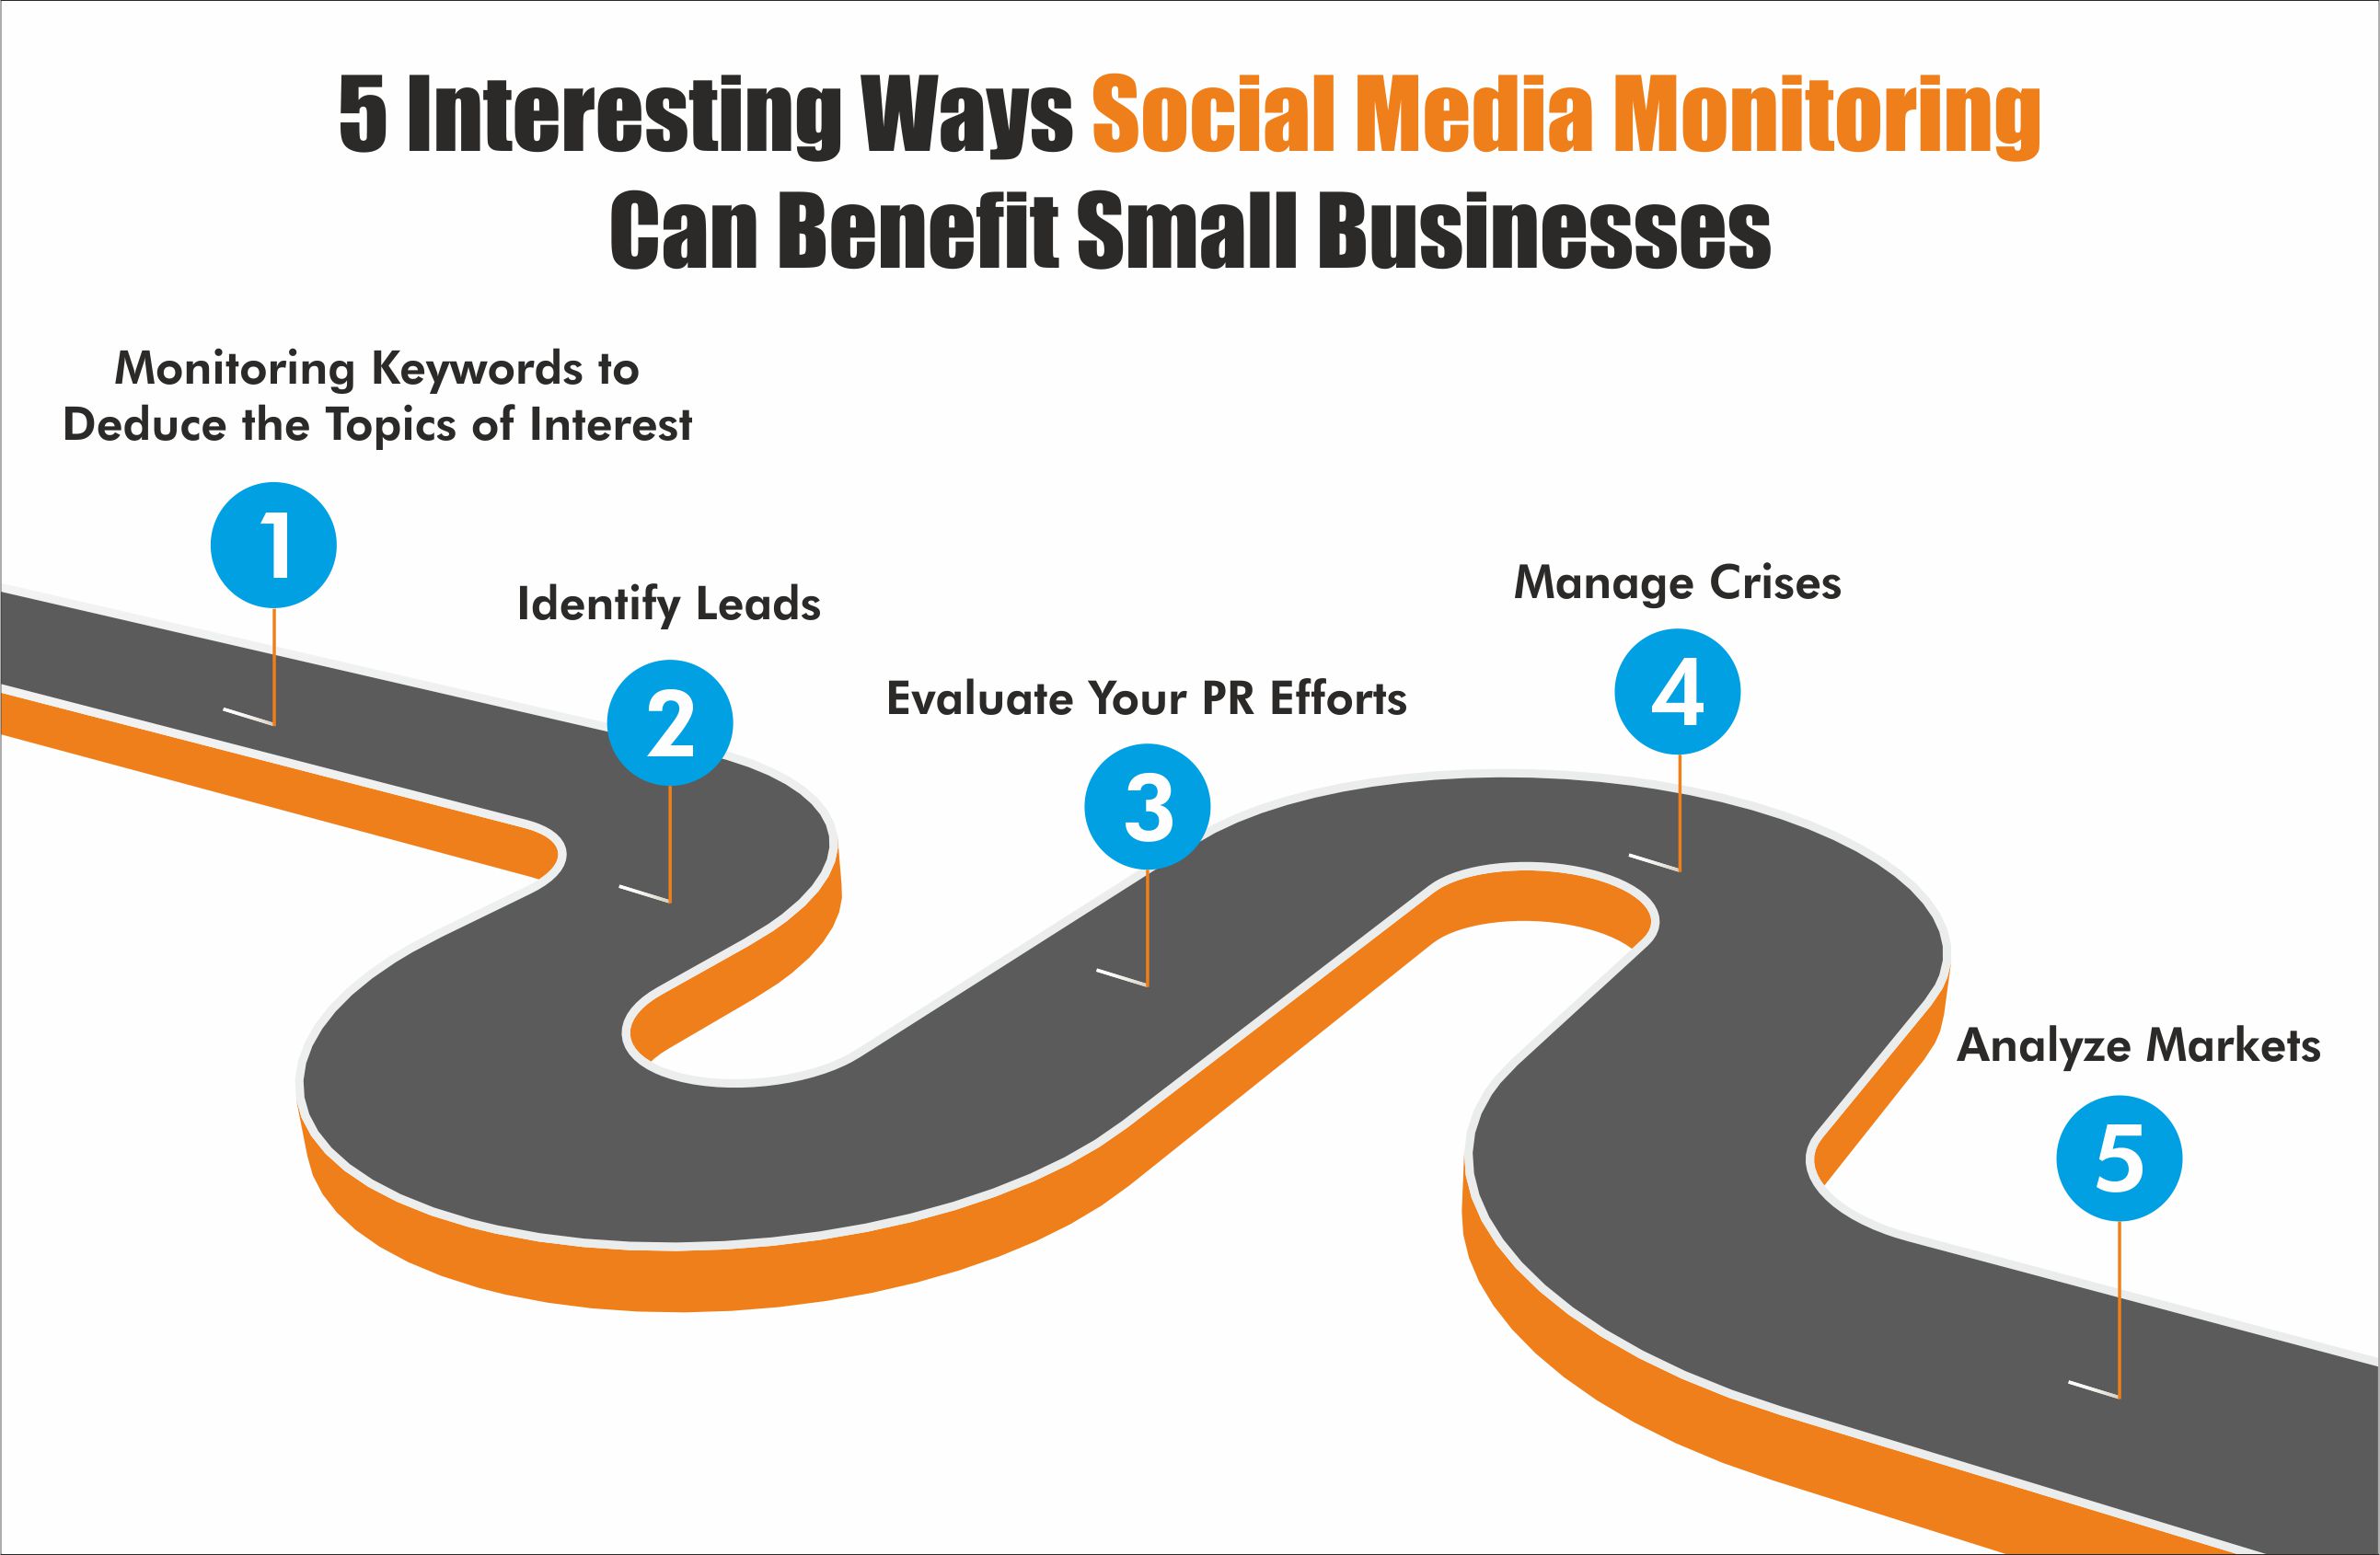 5 Interesting Ways Social Media Monitoring Can Benefit Small Businesses